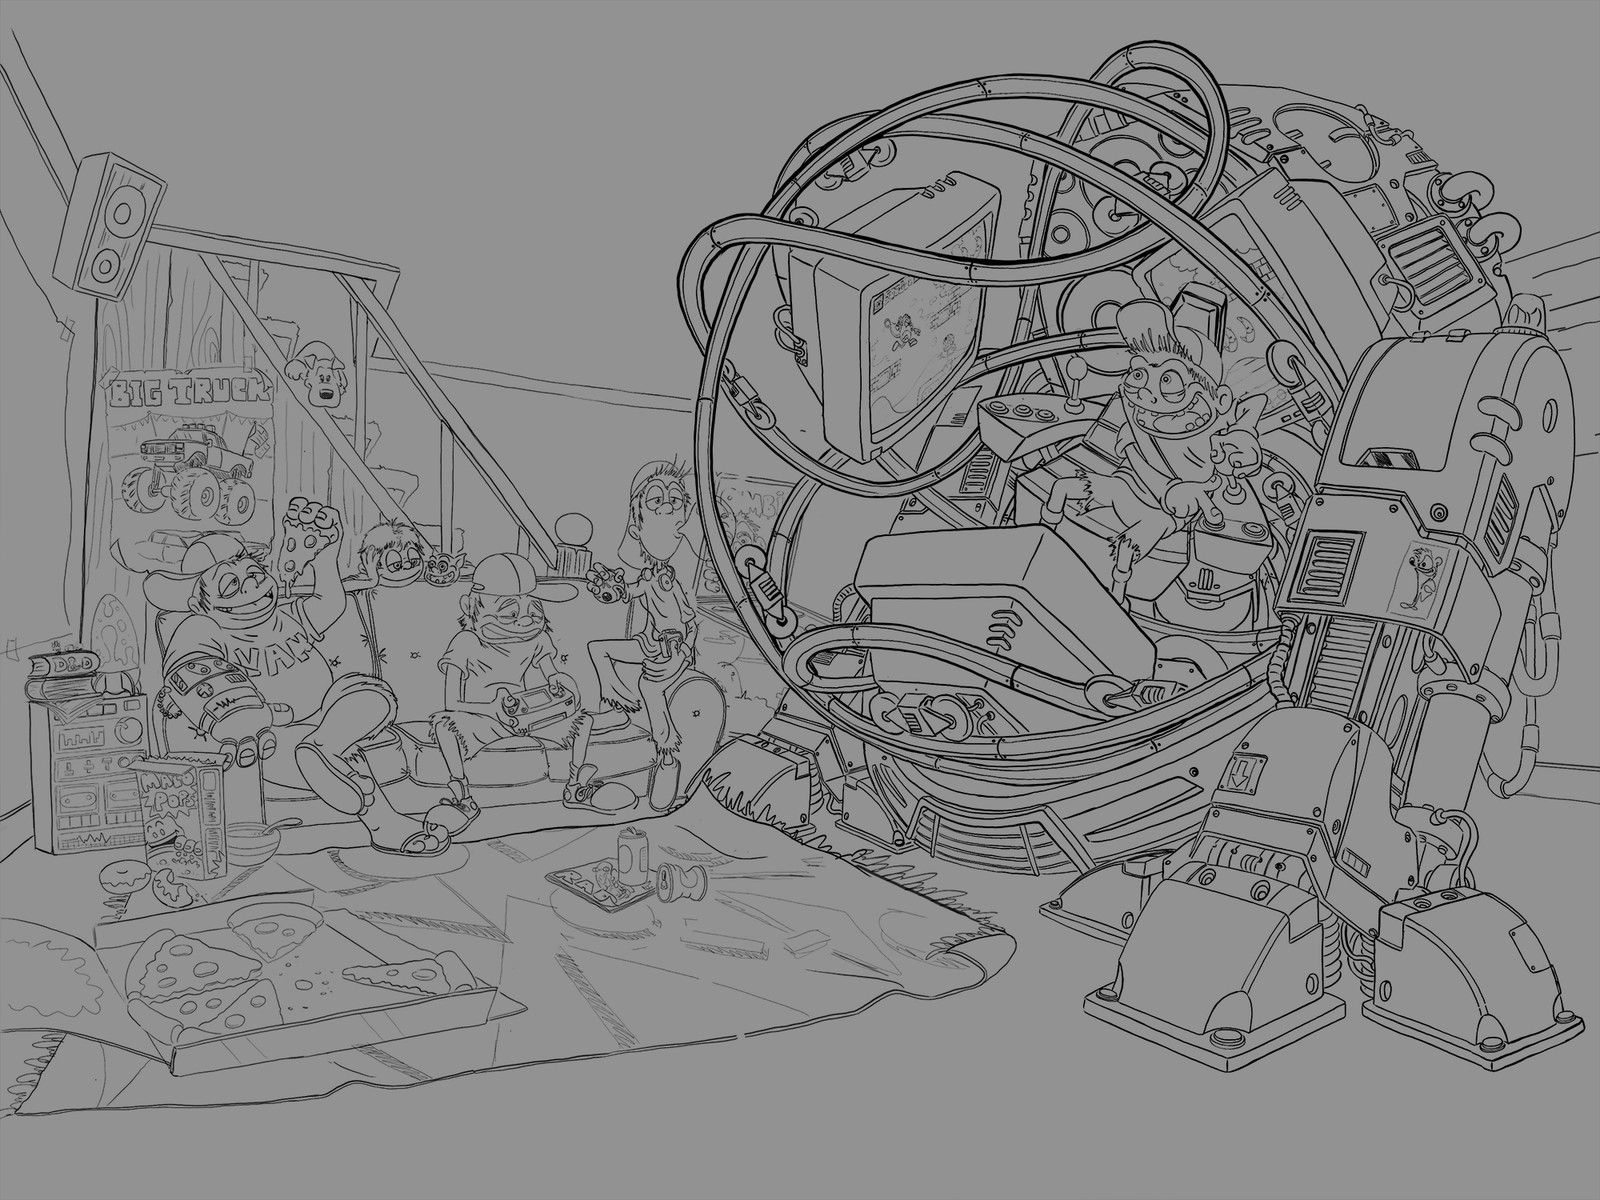 Original line artwork. Rough geometry for the room and a sphere for the machine served as a guide.